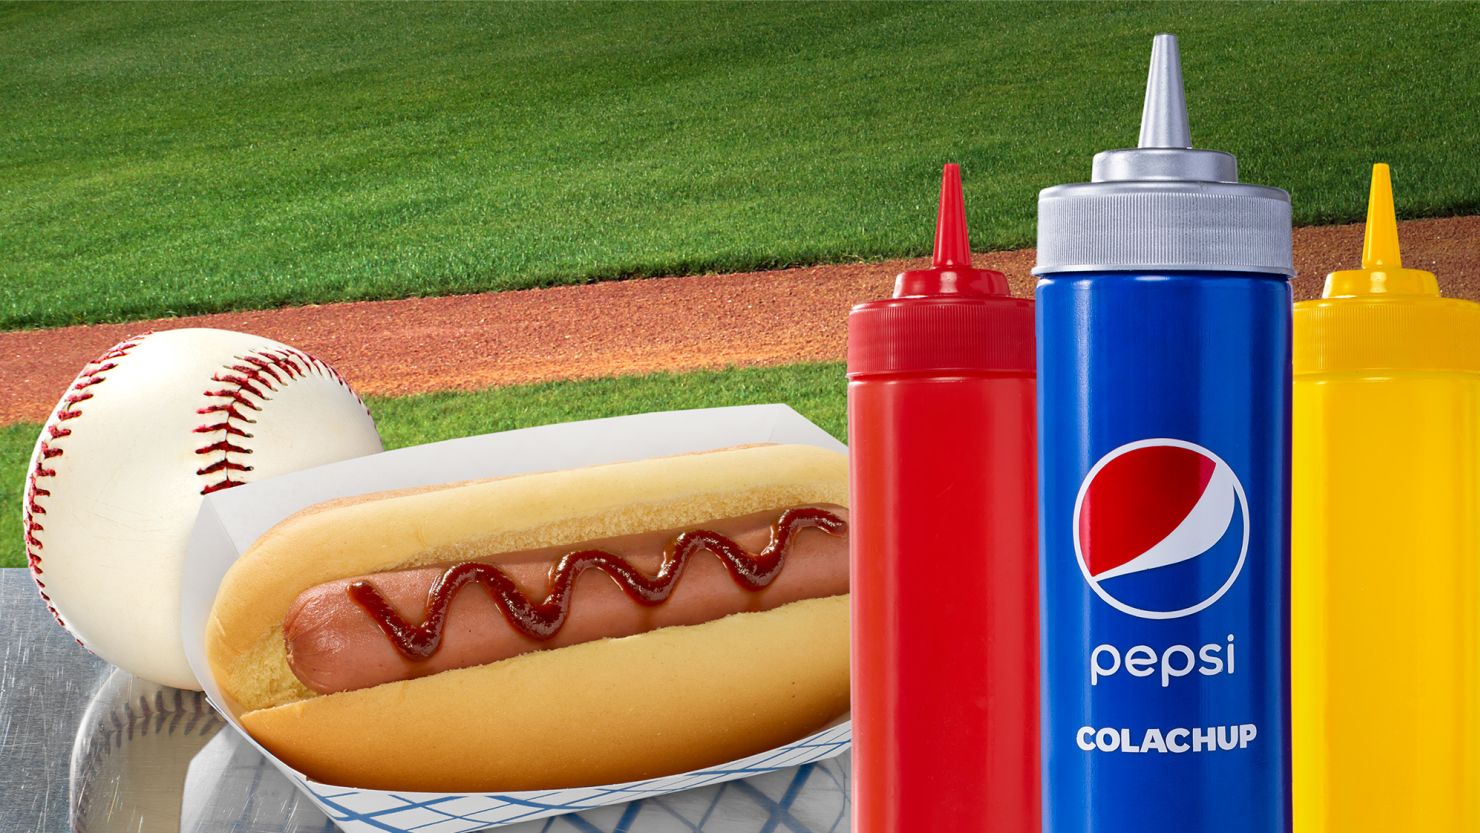 Pepsi is making a condiment